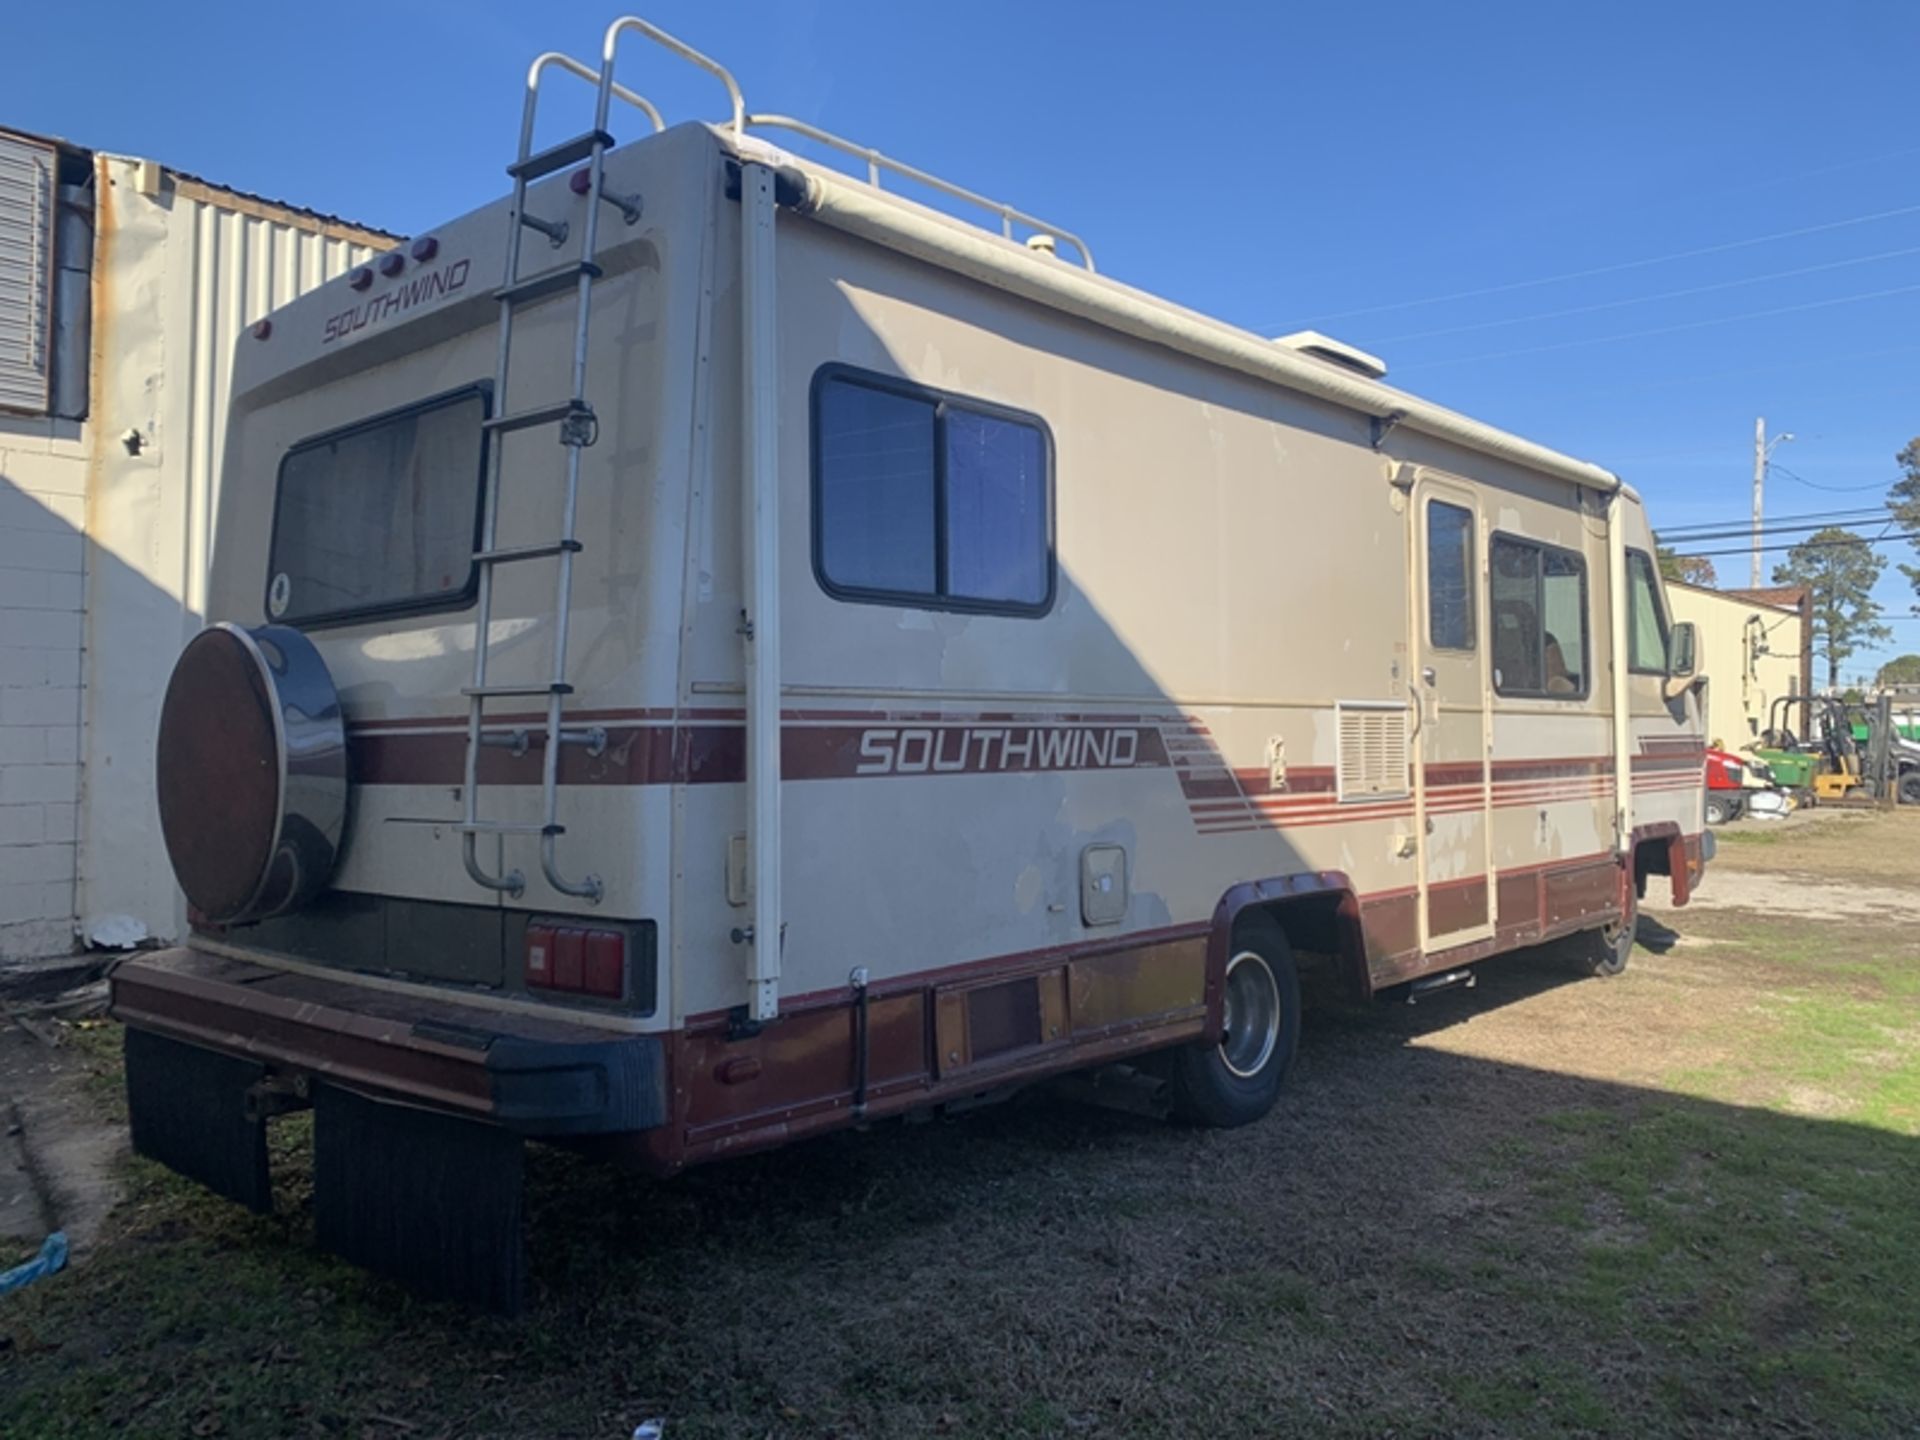 1987 FLEETWOOD Southwind motorhome - 72,271 miles showing - 1GBJP37W6H3301351 - Image 3 of 16